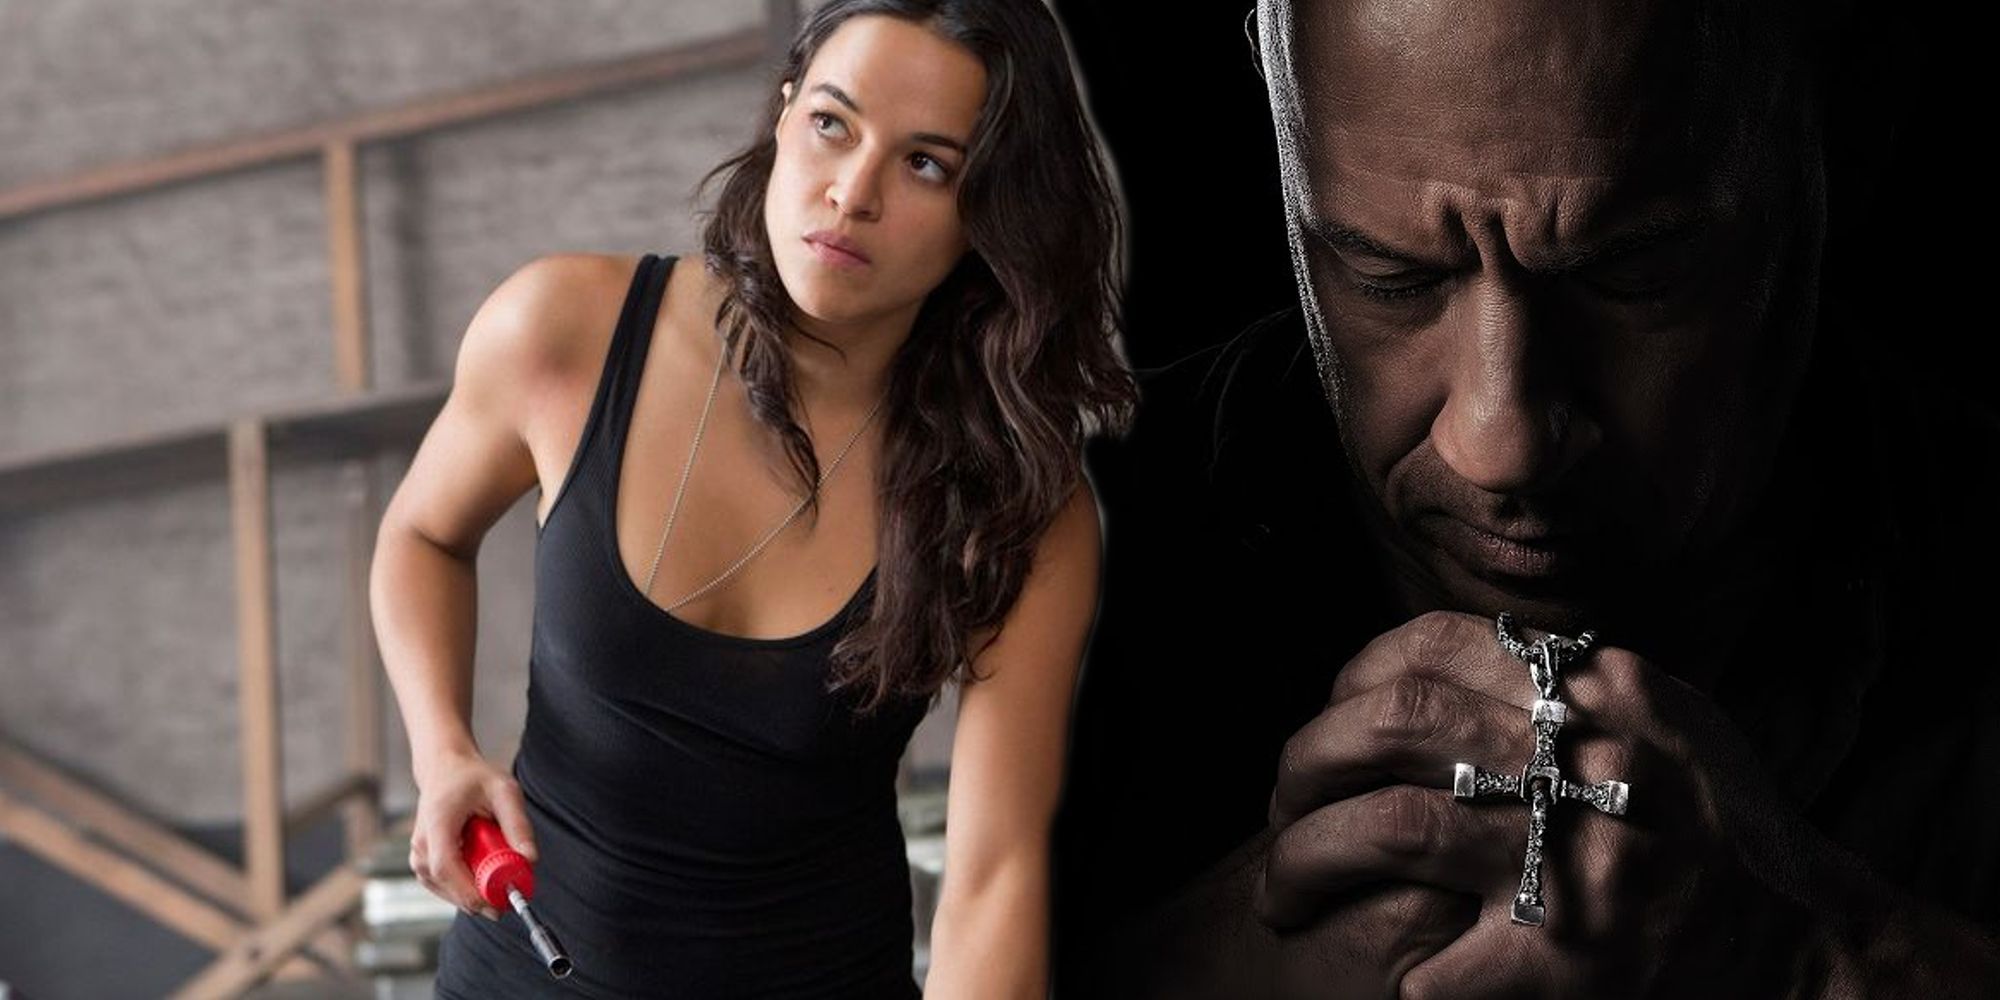 Michelle Rodriguez as Letty with the Fast X poster